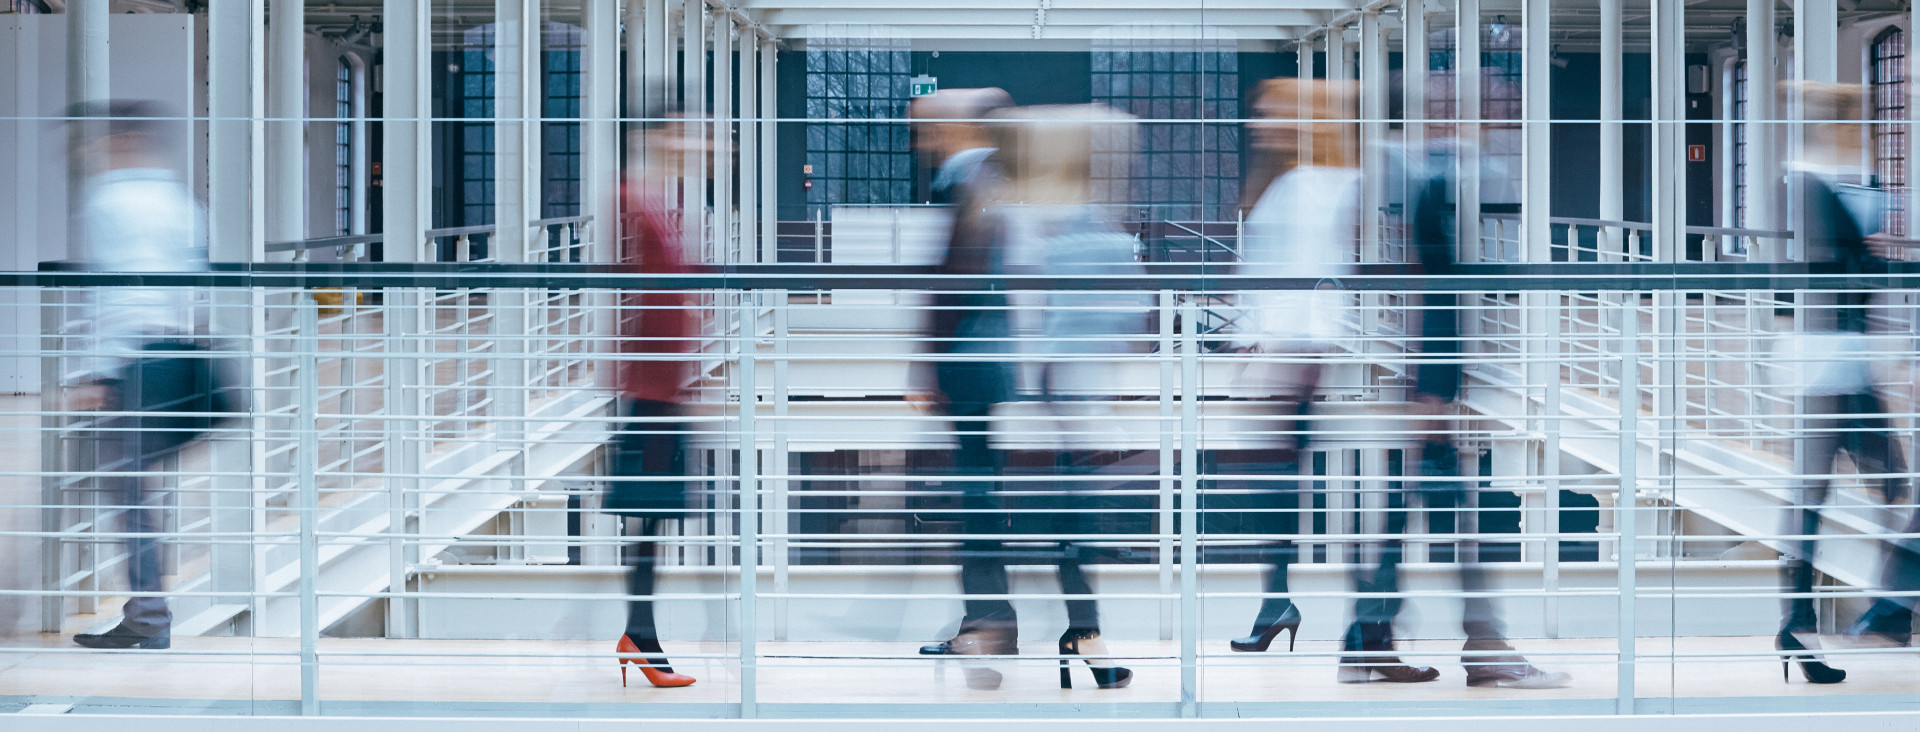 An abstract image of people walking in a professional setting.